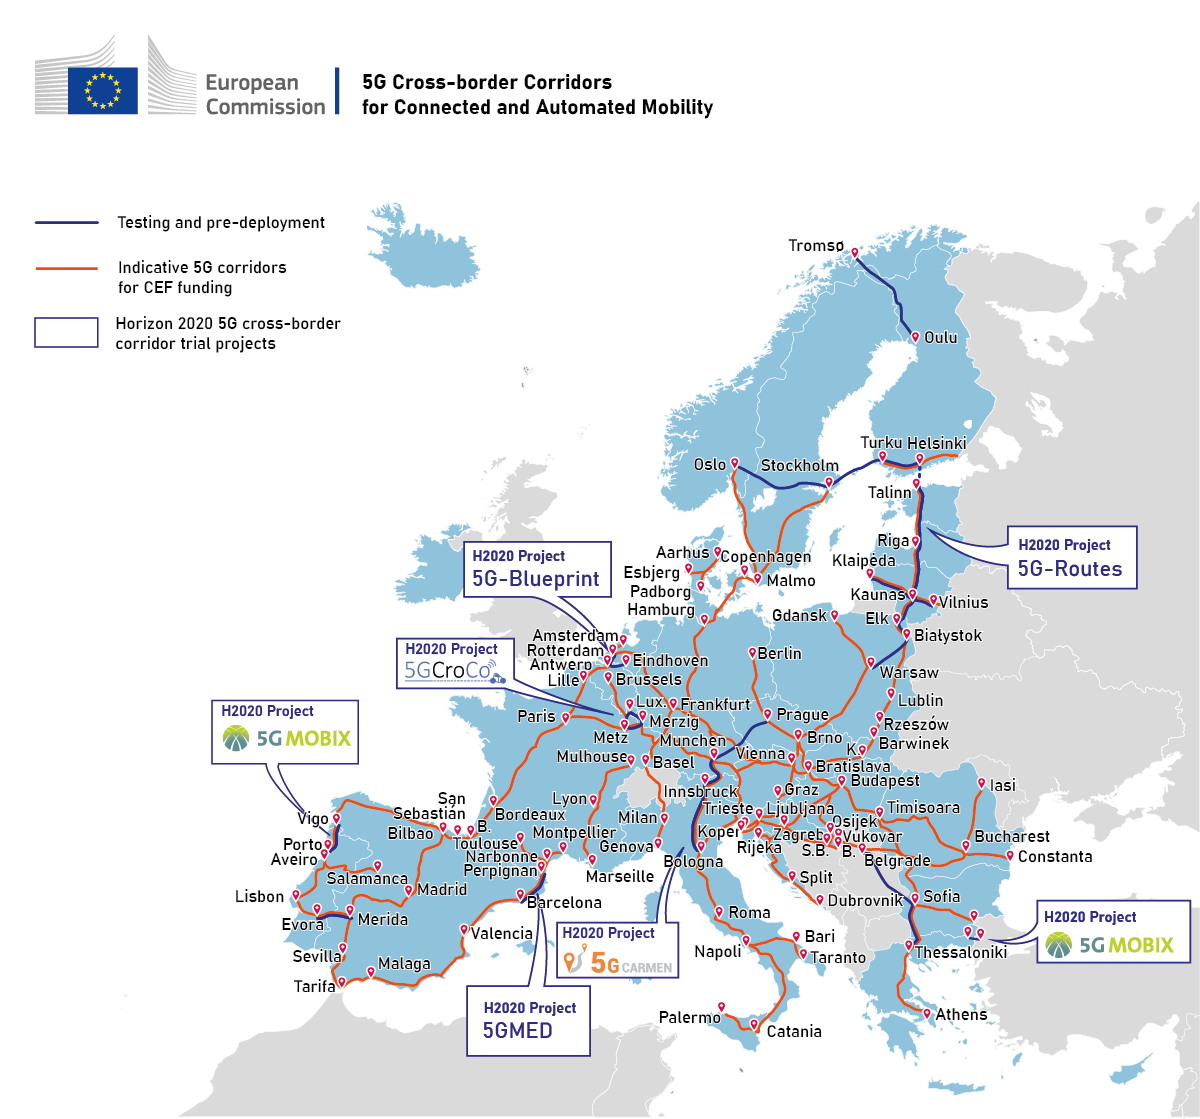 A map of 5G cross border corridors in Europe, including testing and predeployment, indicative corridors for CEF funding, and Horizon 2020 trial projects